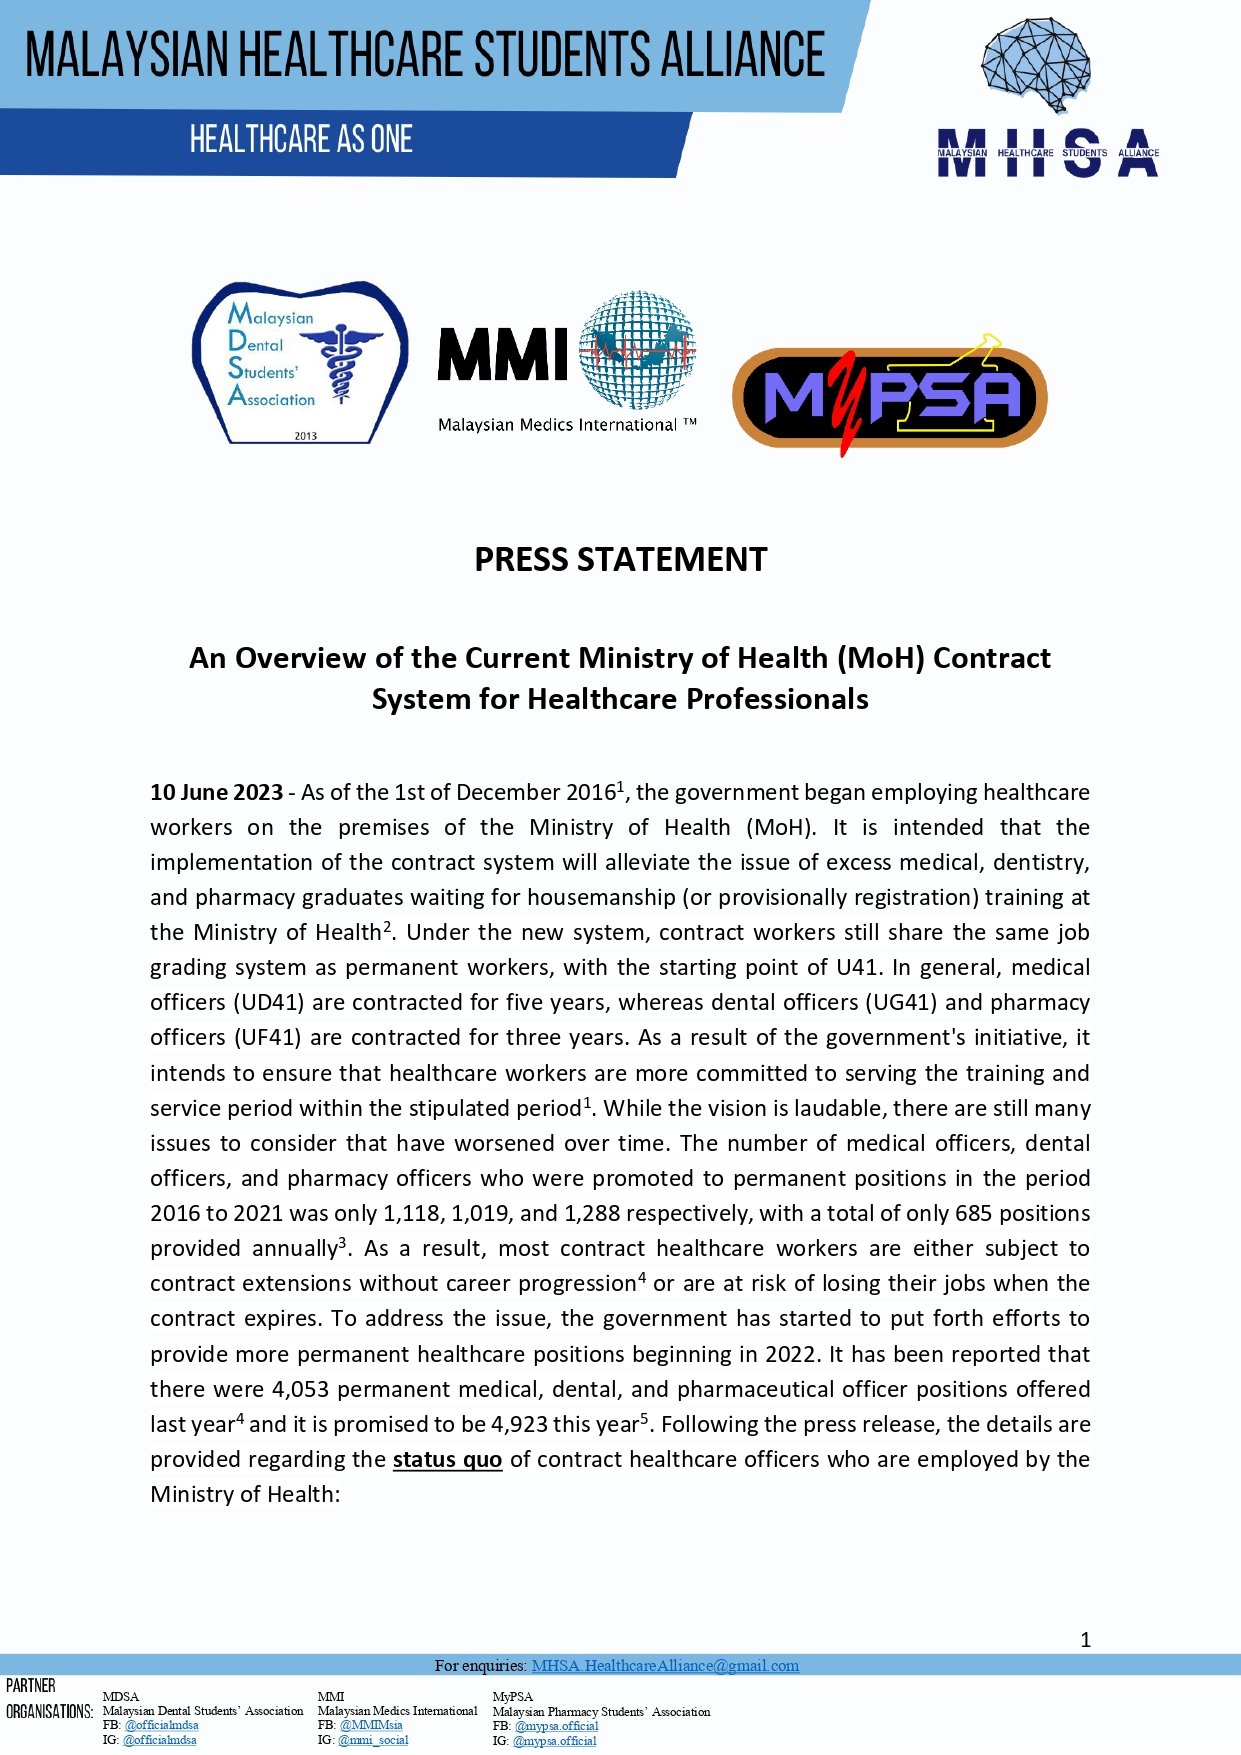 MHSA Press Statement 2023 - An Overview of the Current MoH Contract System for HCPs_page-0001.jpg